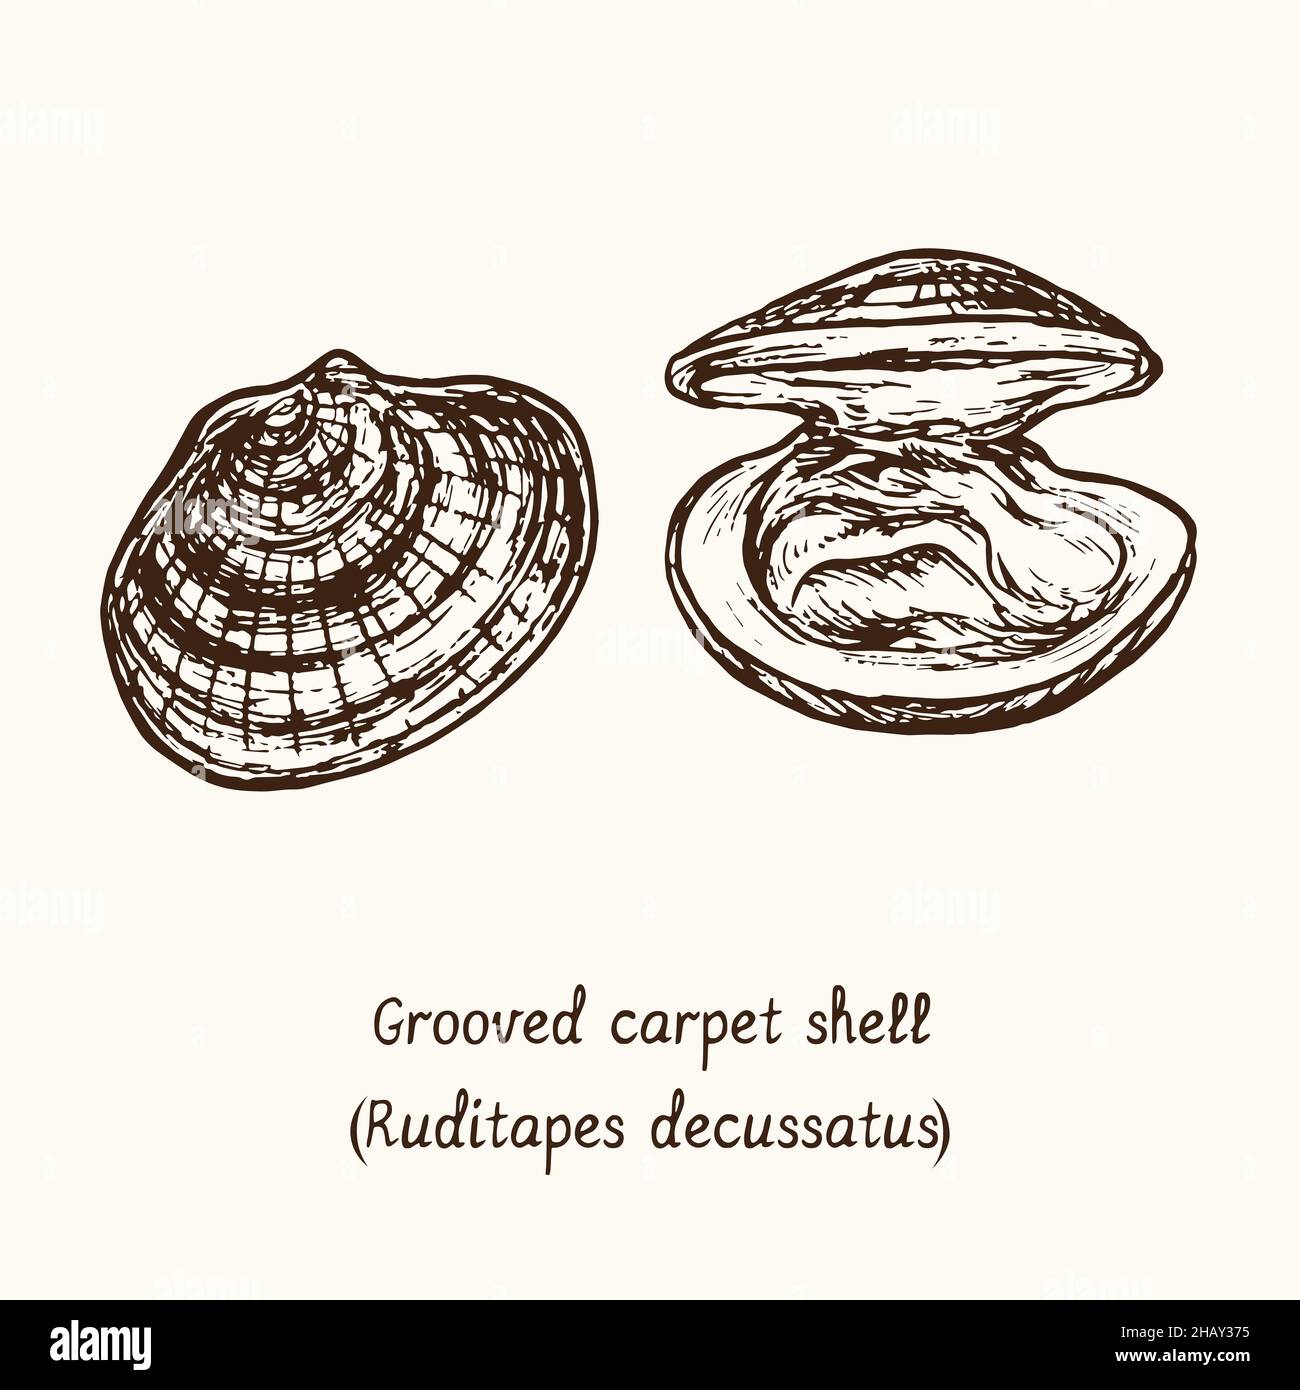 Grooved carpet shell (Ruditapes decussatus) open and closed shall. Ink black and white doodle drawing in woodcut style with inscription. Stock Photo